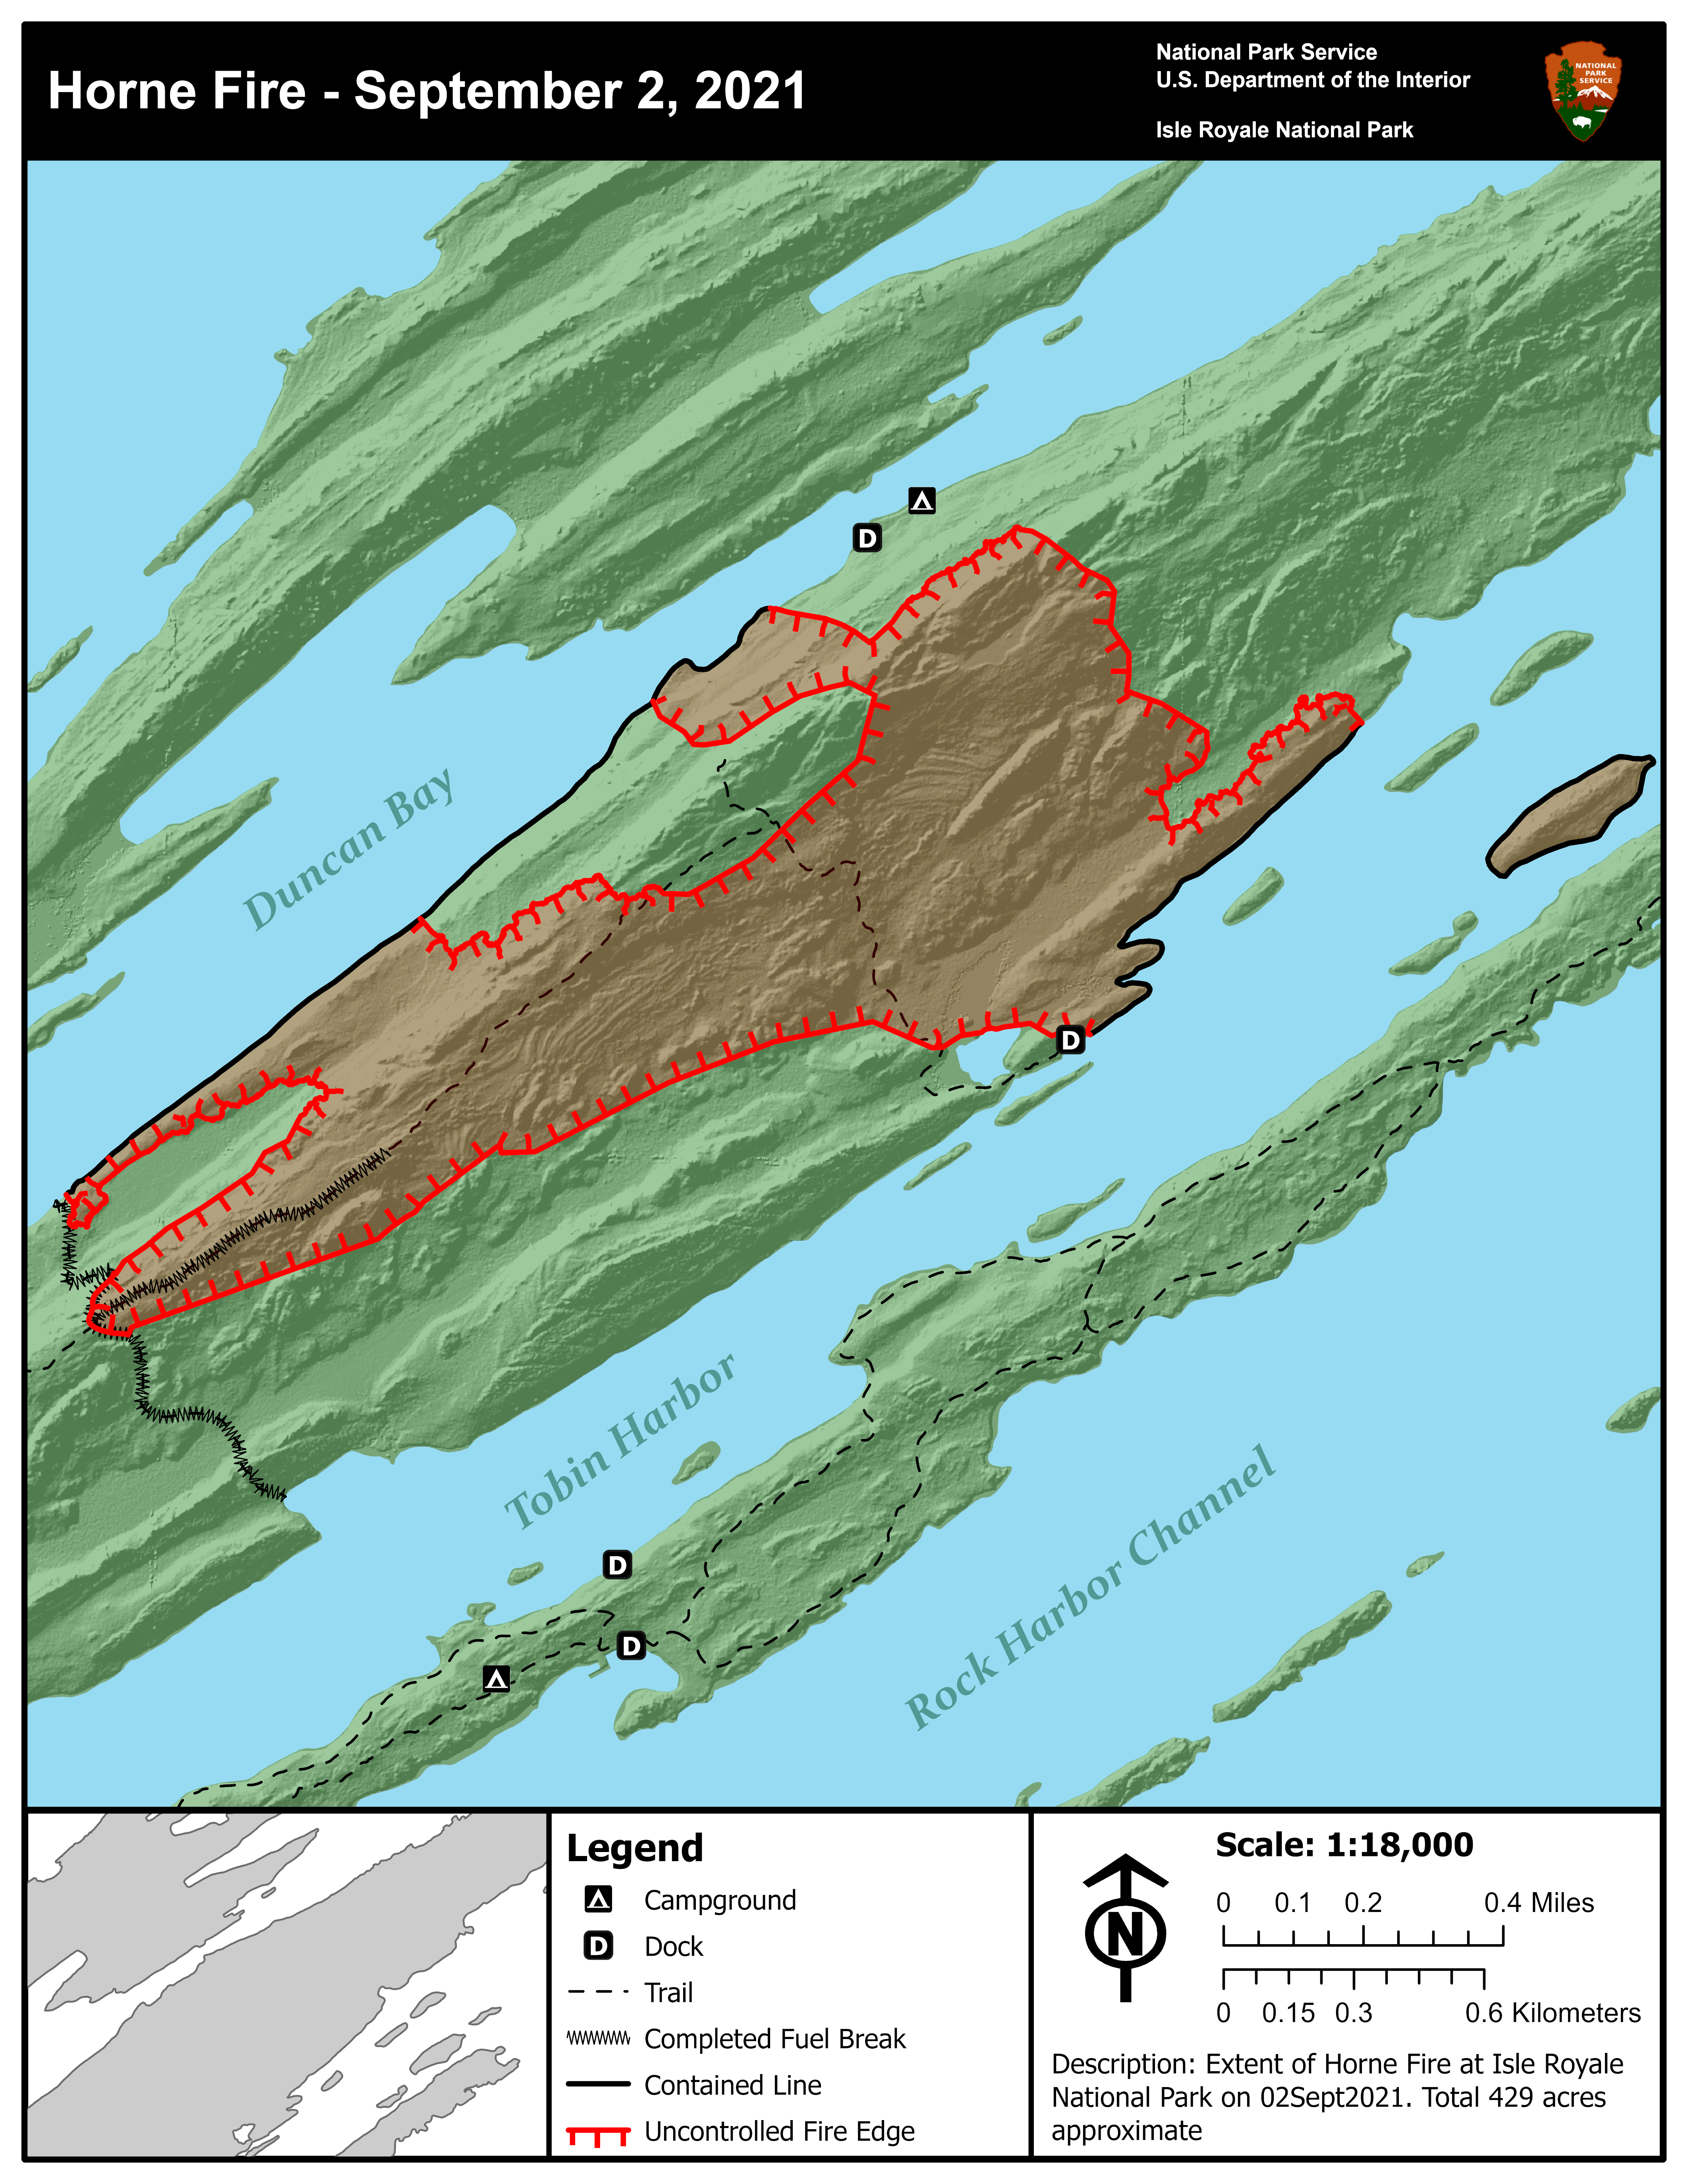 A map showing the Horne Fire area on Isle Royale's northeast end.